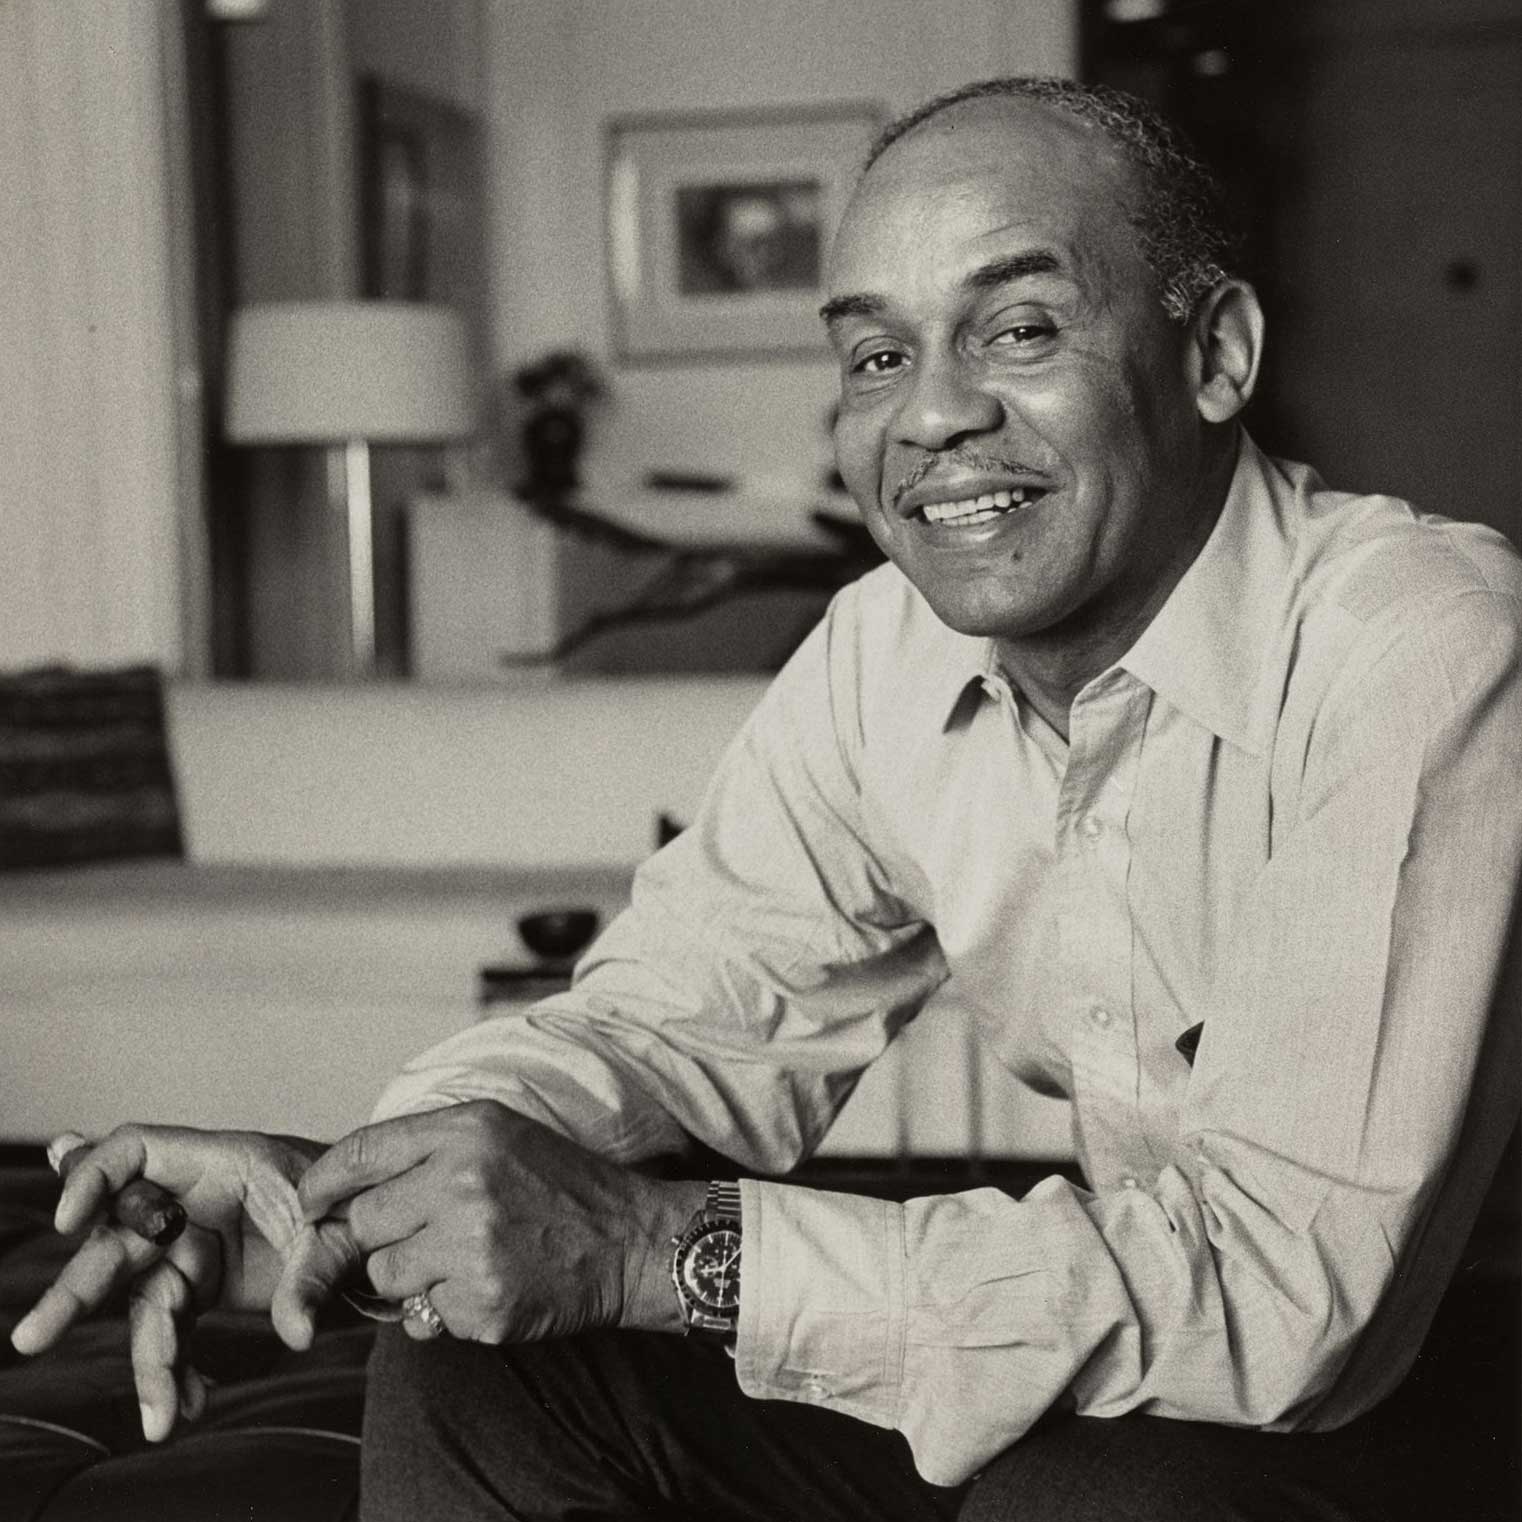 Ralph W. Ellison, 20th century American writer and scholar best known for his renowned, award-winning novel 'Invisible Man.' (Image: © NANCY CRAMPTON. RALPH ELLISON PAPERS, PRINTS & PHOTOGRAPHS DIVISION, LIBRARY OF CONGRESS)